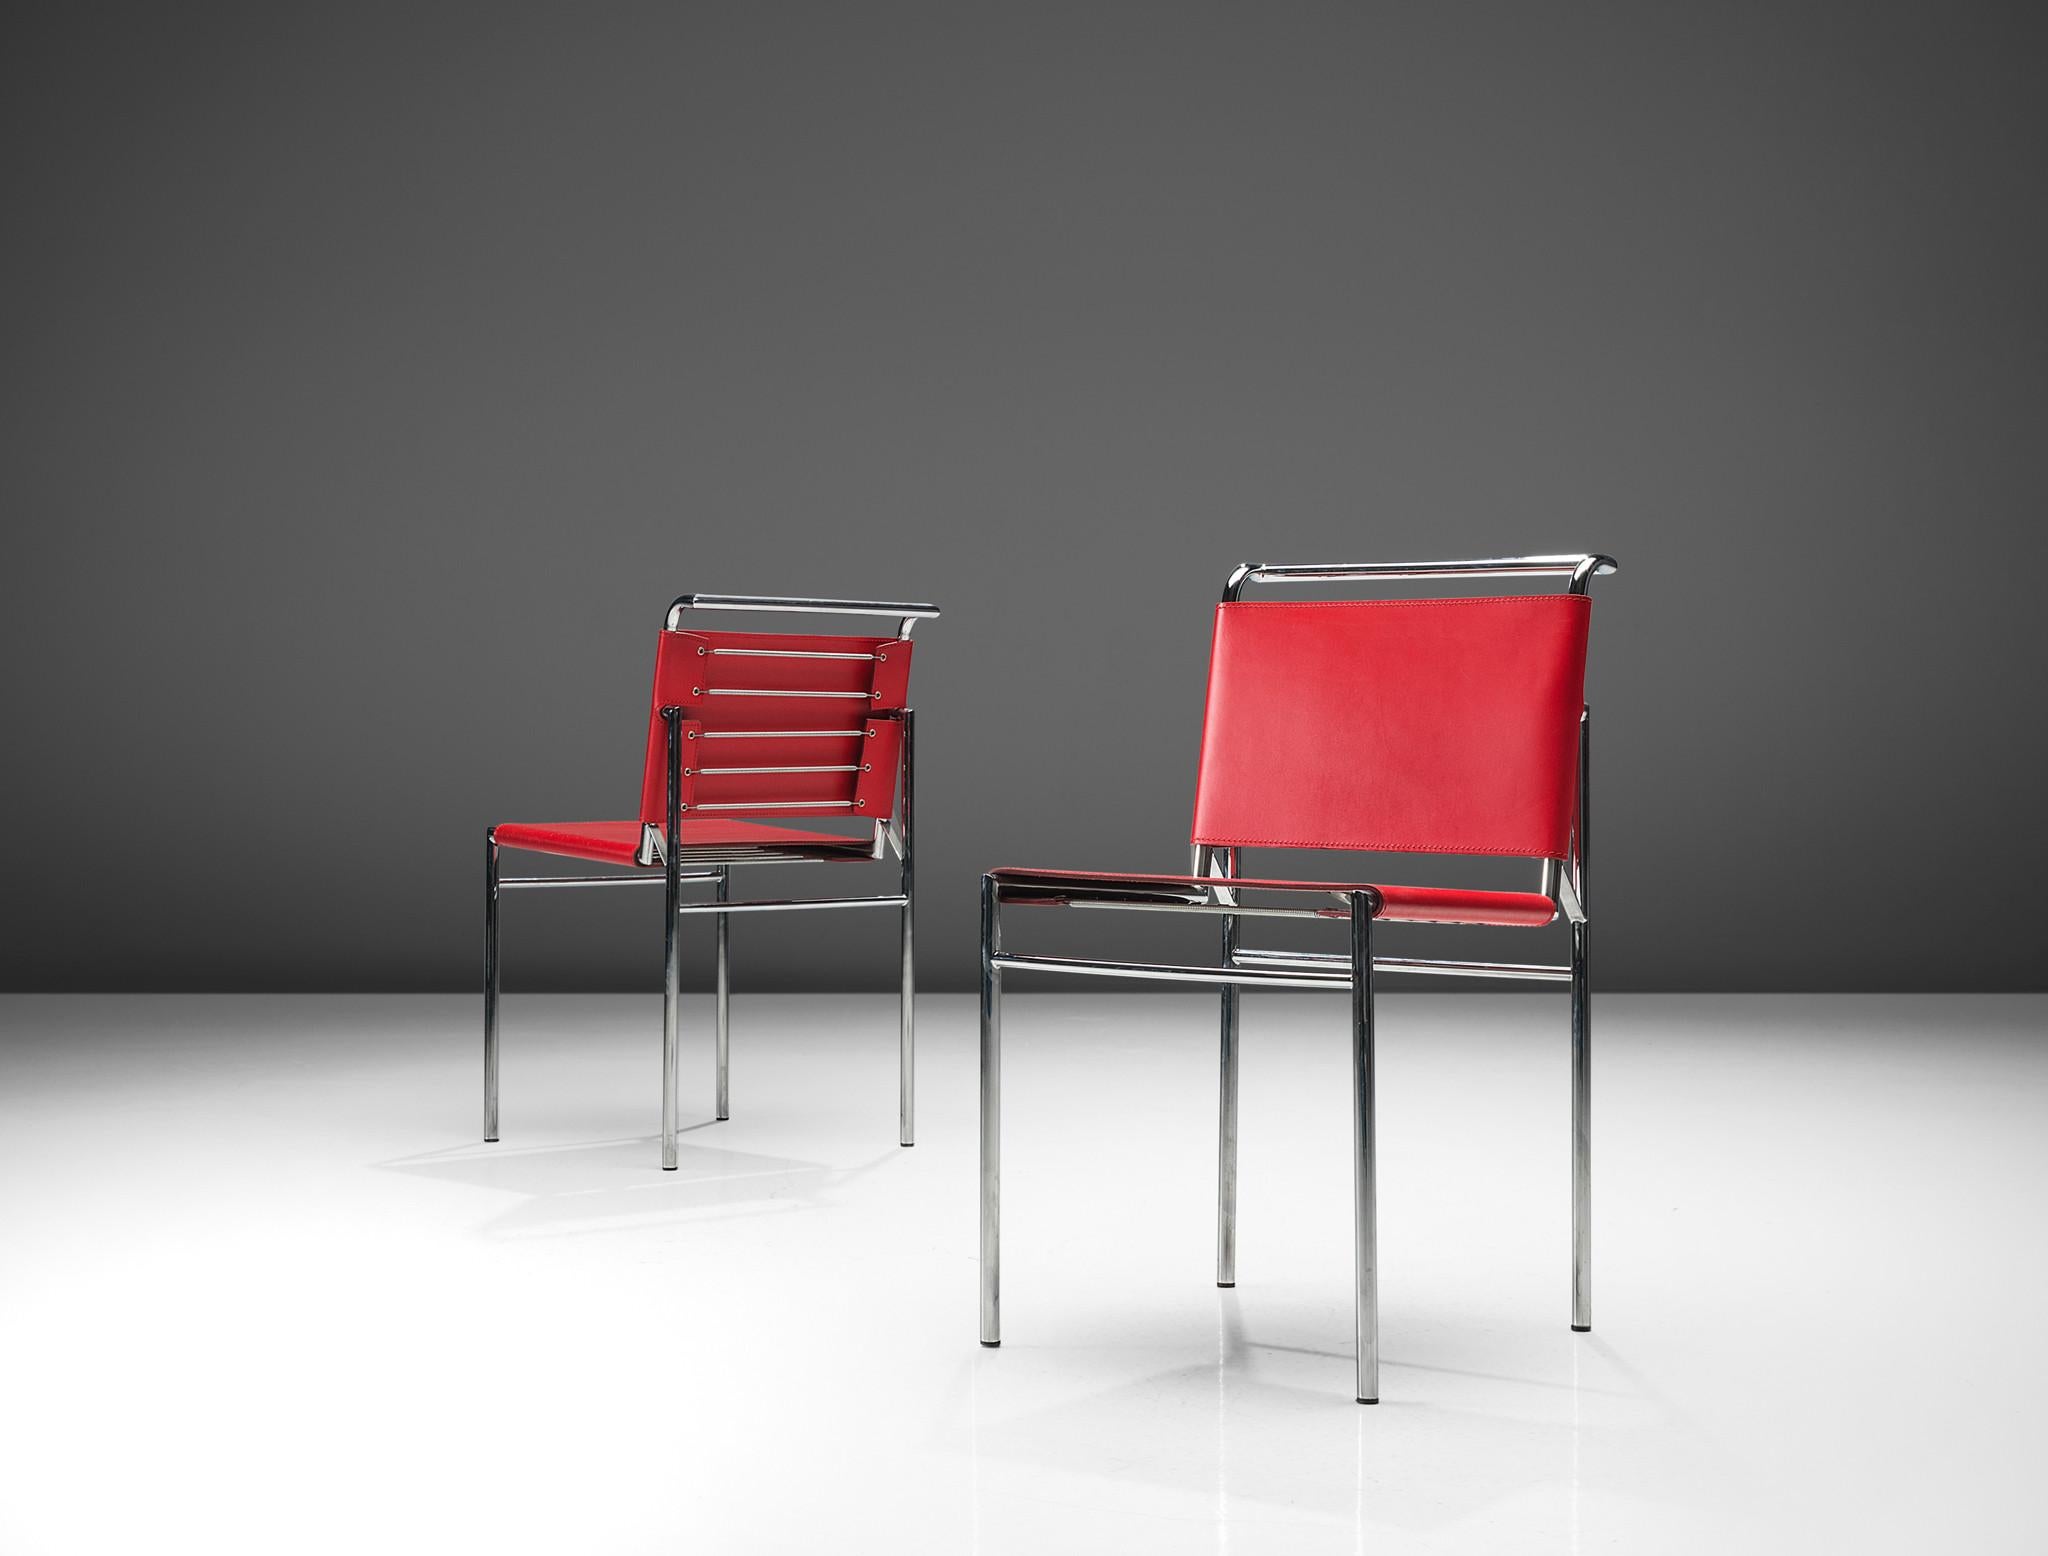 Eileen Gray, pair of 'Roquebrune' chairs, chrome-plated steel, red leather, France, design 1927, later production

Sleek pair of roquebrune chairs designed by Eileen Gray. The frame is made out of polished chromium plated tubular steel. Eileen Gray